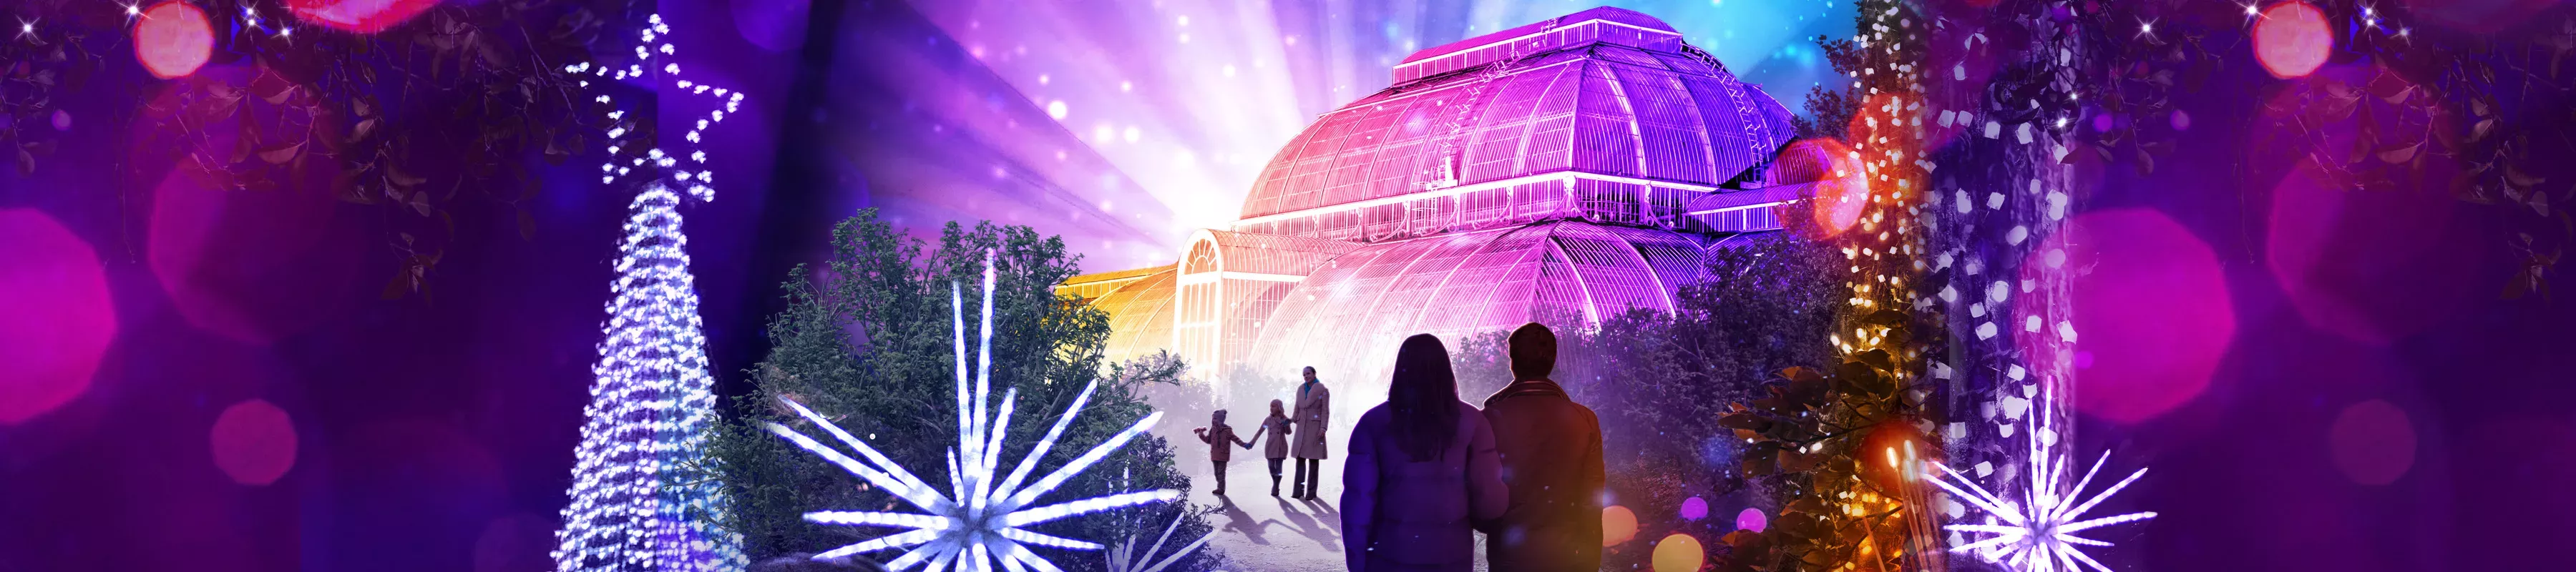 Sparkles, fairy lights and a glowing glass house for Christmas at Kew